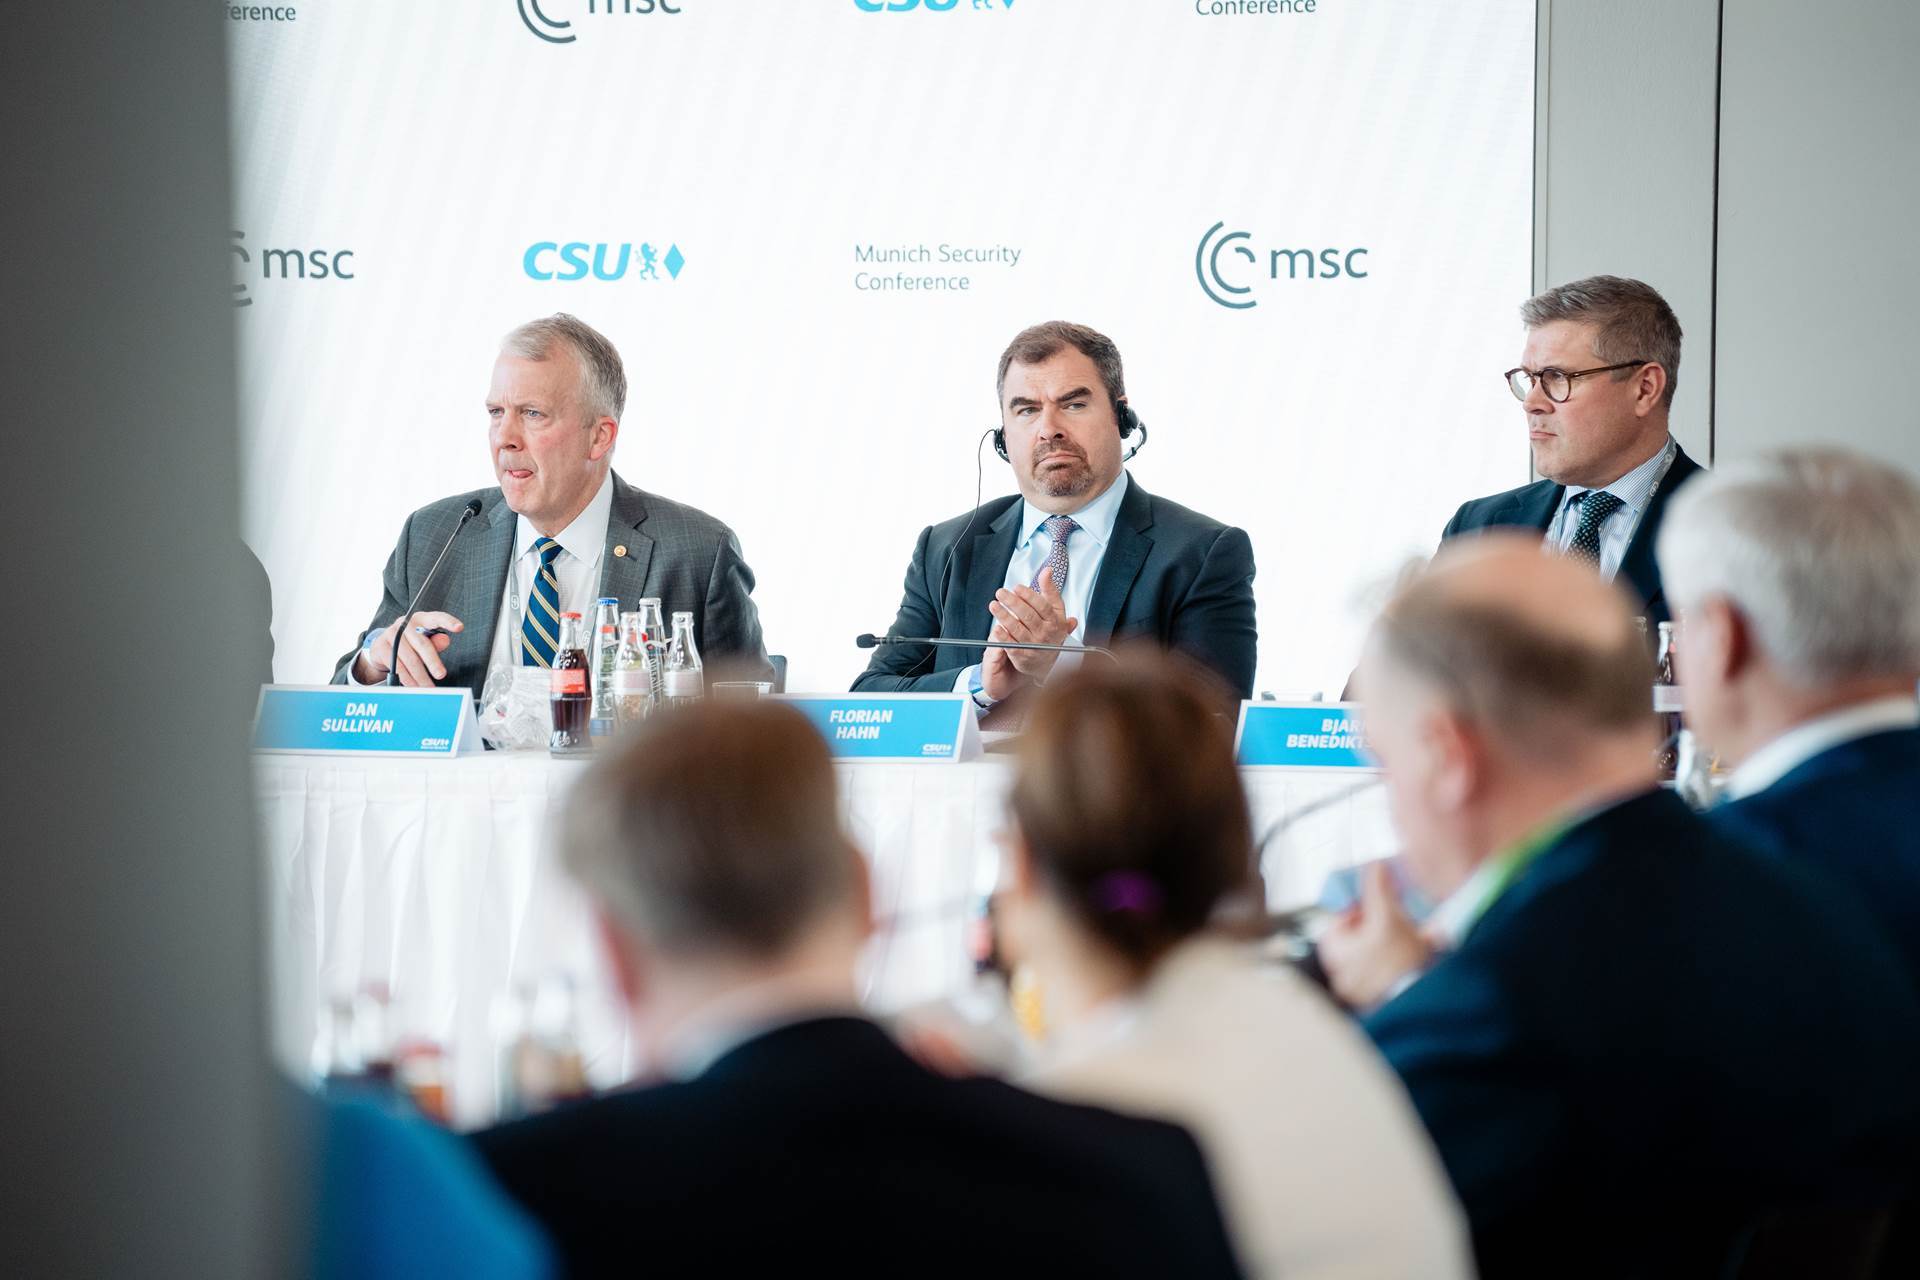 Support for Ukraine on the top of the agenda at the Munich Security Conference - mynd